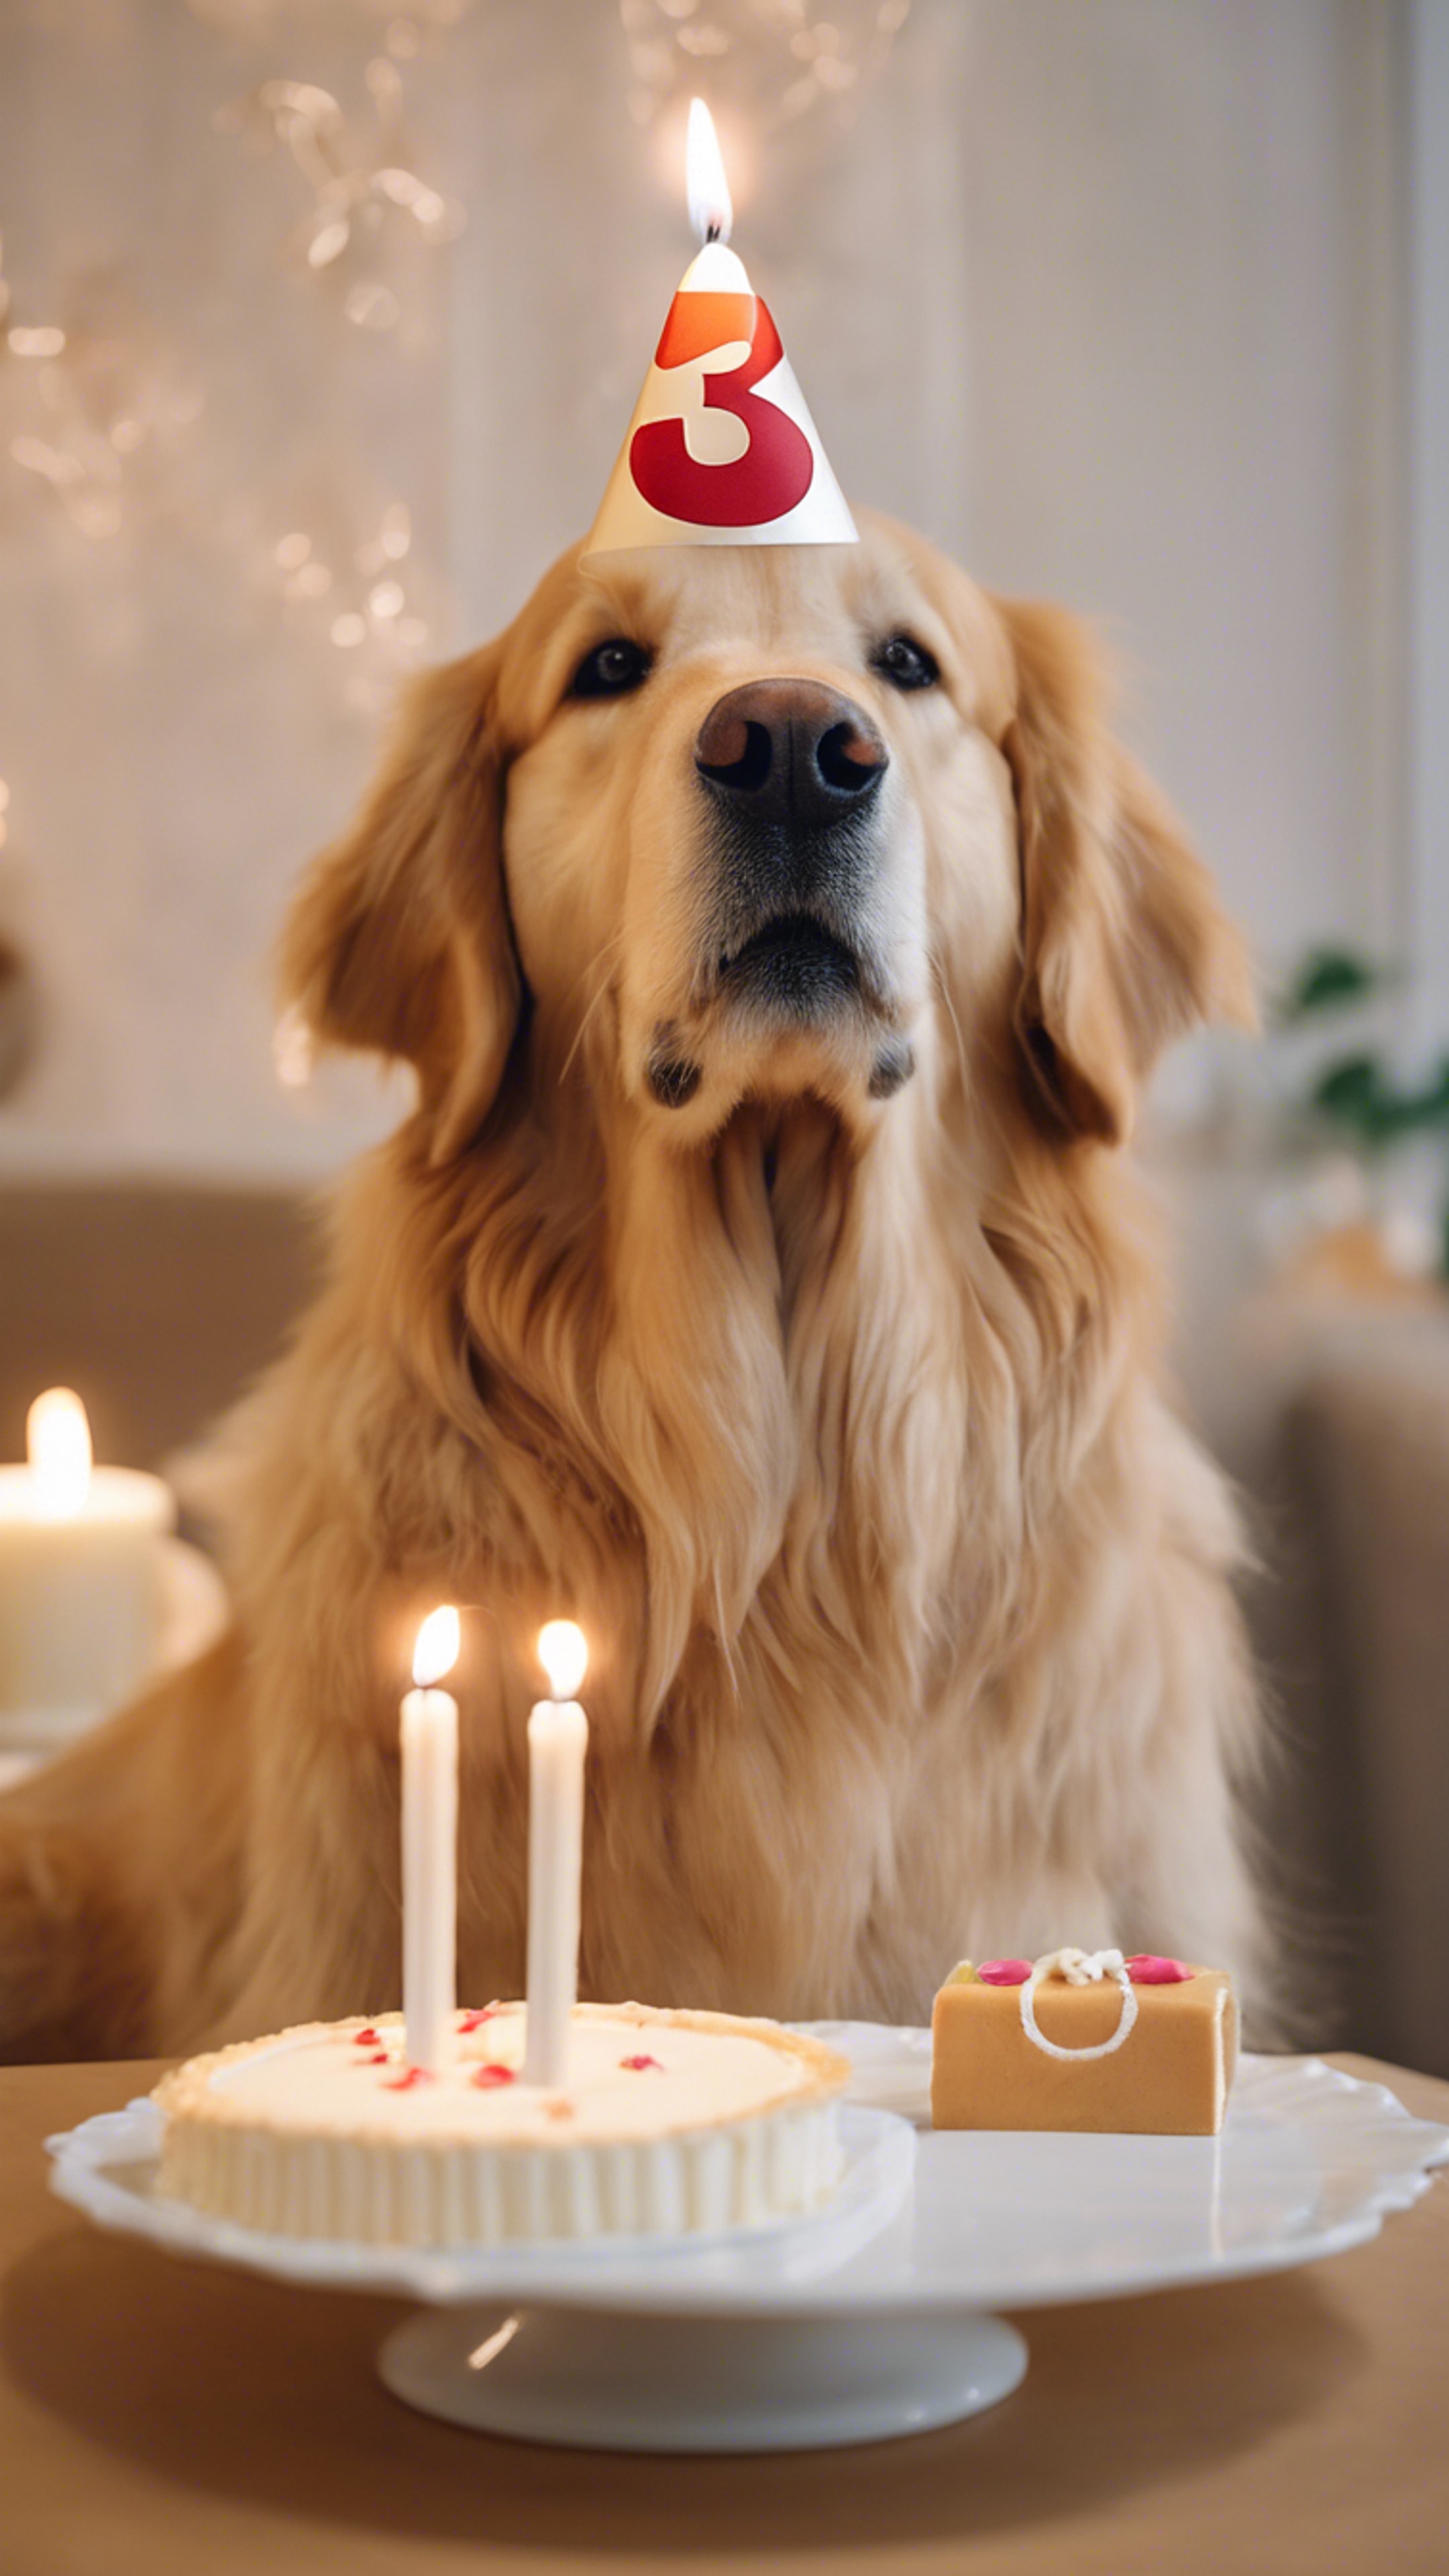 A golden retriever wearing a birthday hat, sitting in front of a numbered '3' candle on a small cake, looking eagerly at the camera. Tapéta[271fe240b95e4af1b864]